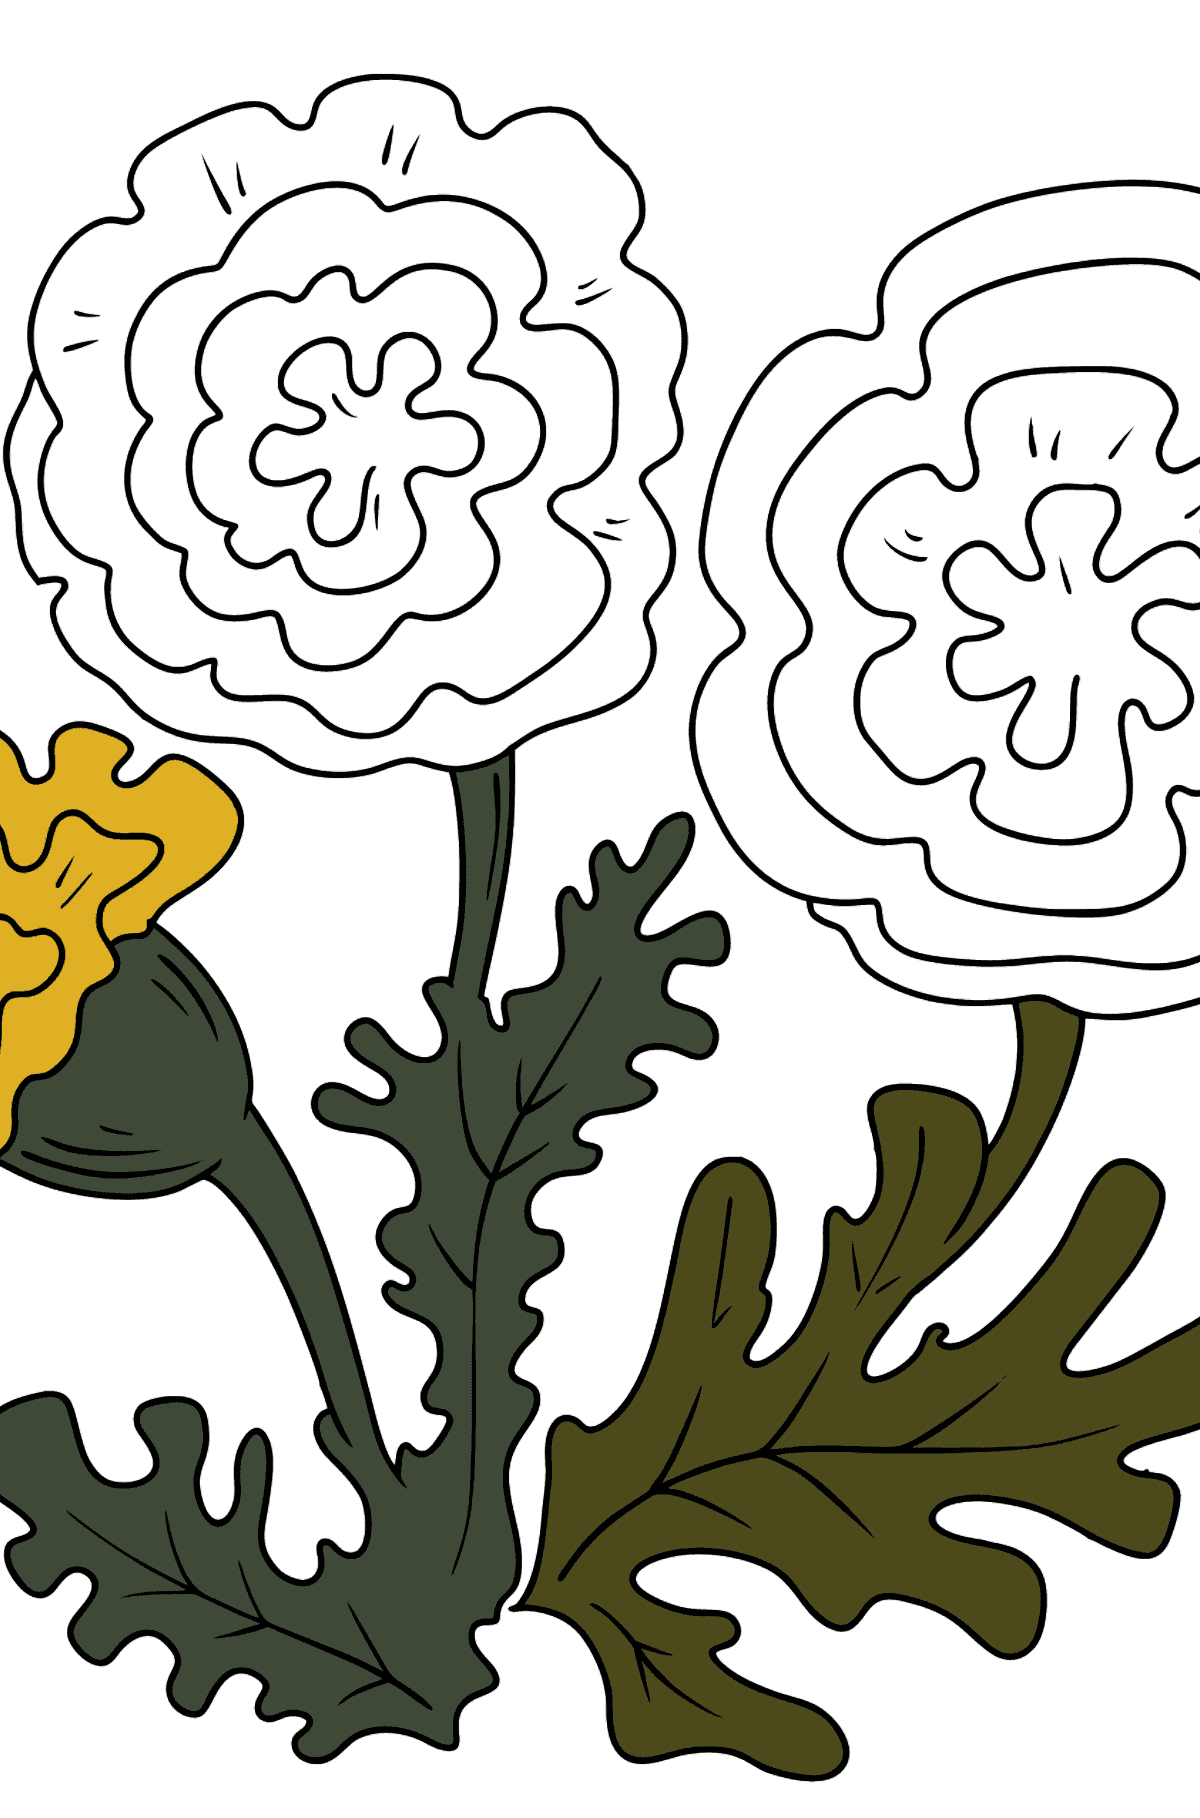 Coloring Page - Autumn flowers - Coloring Pages for Kids